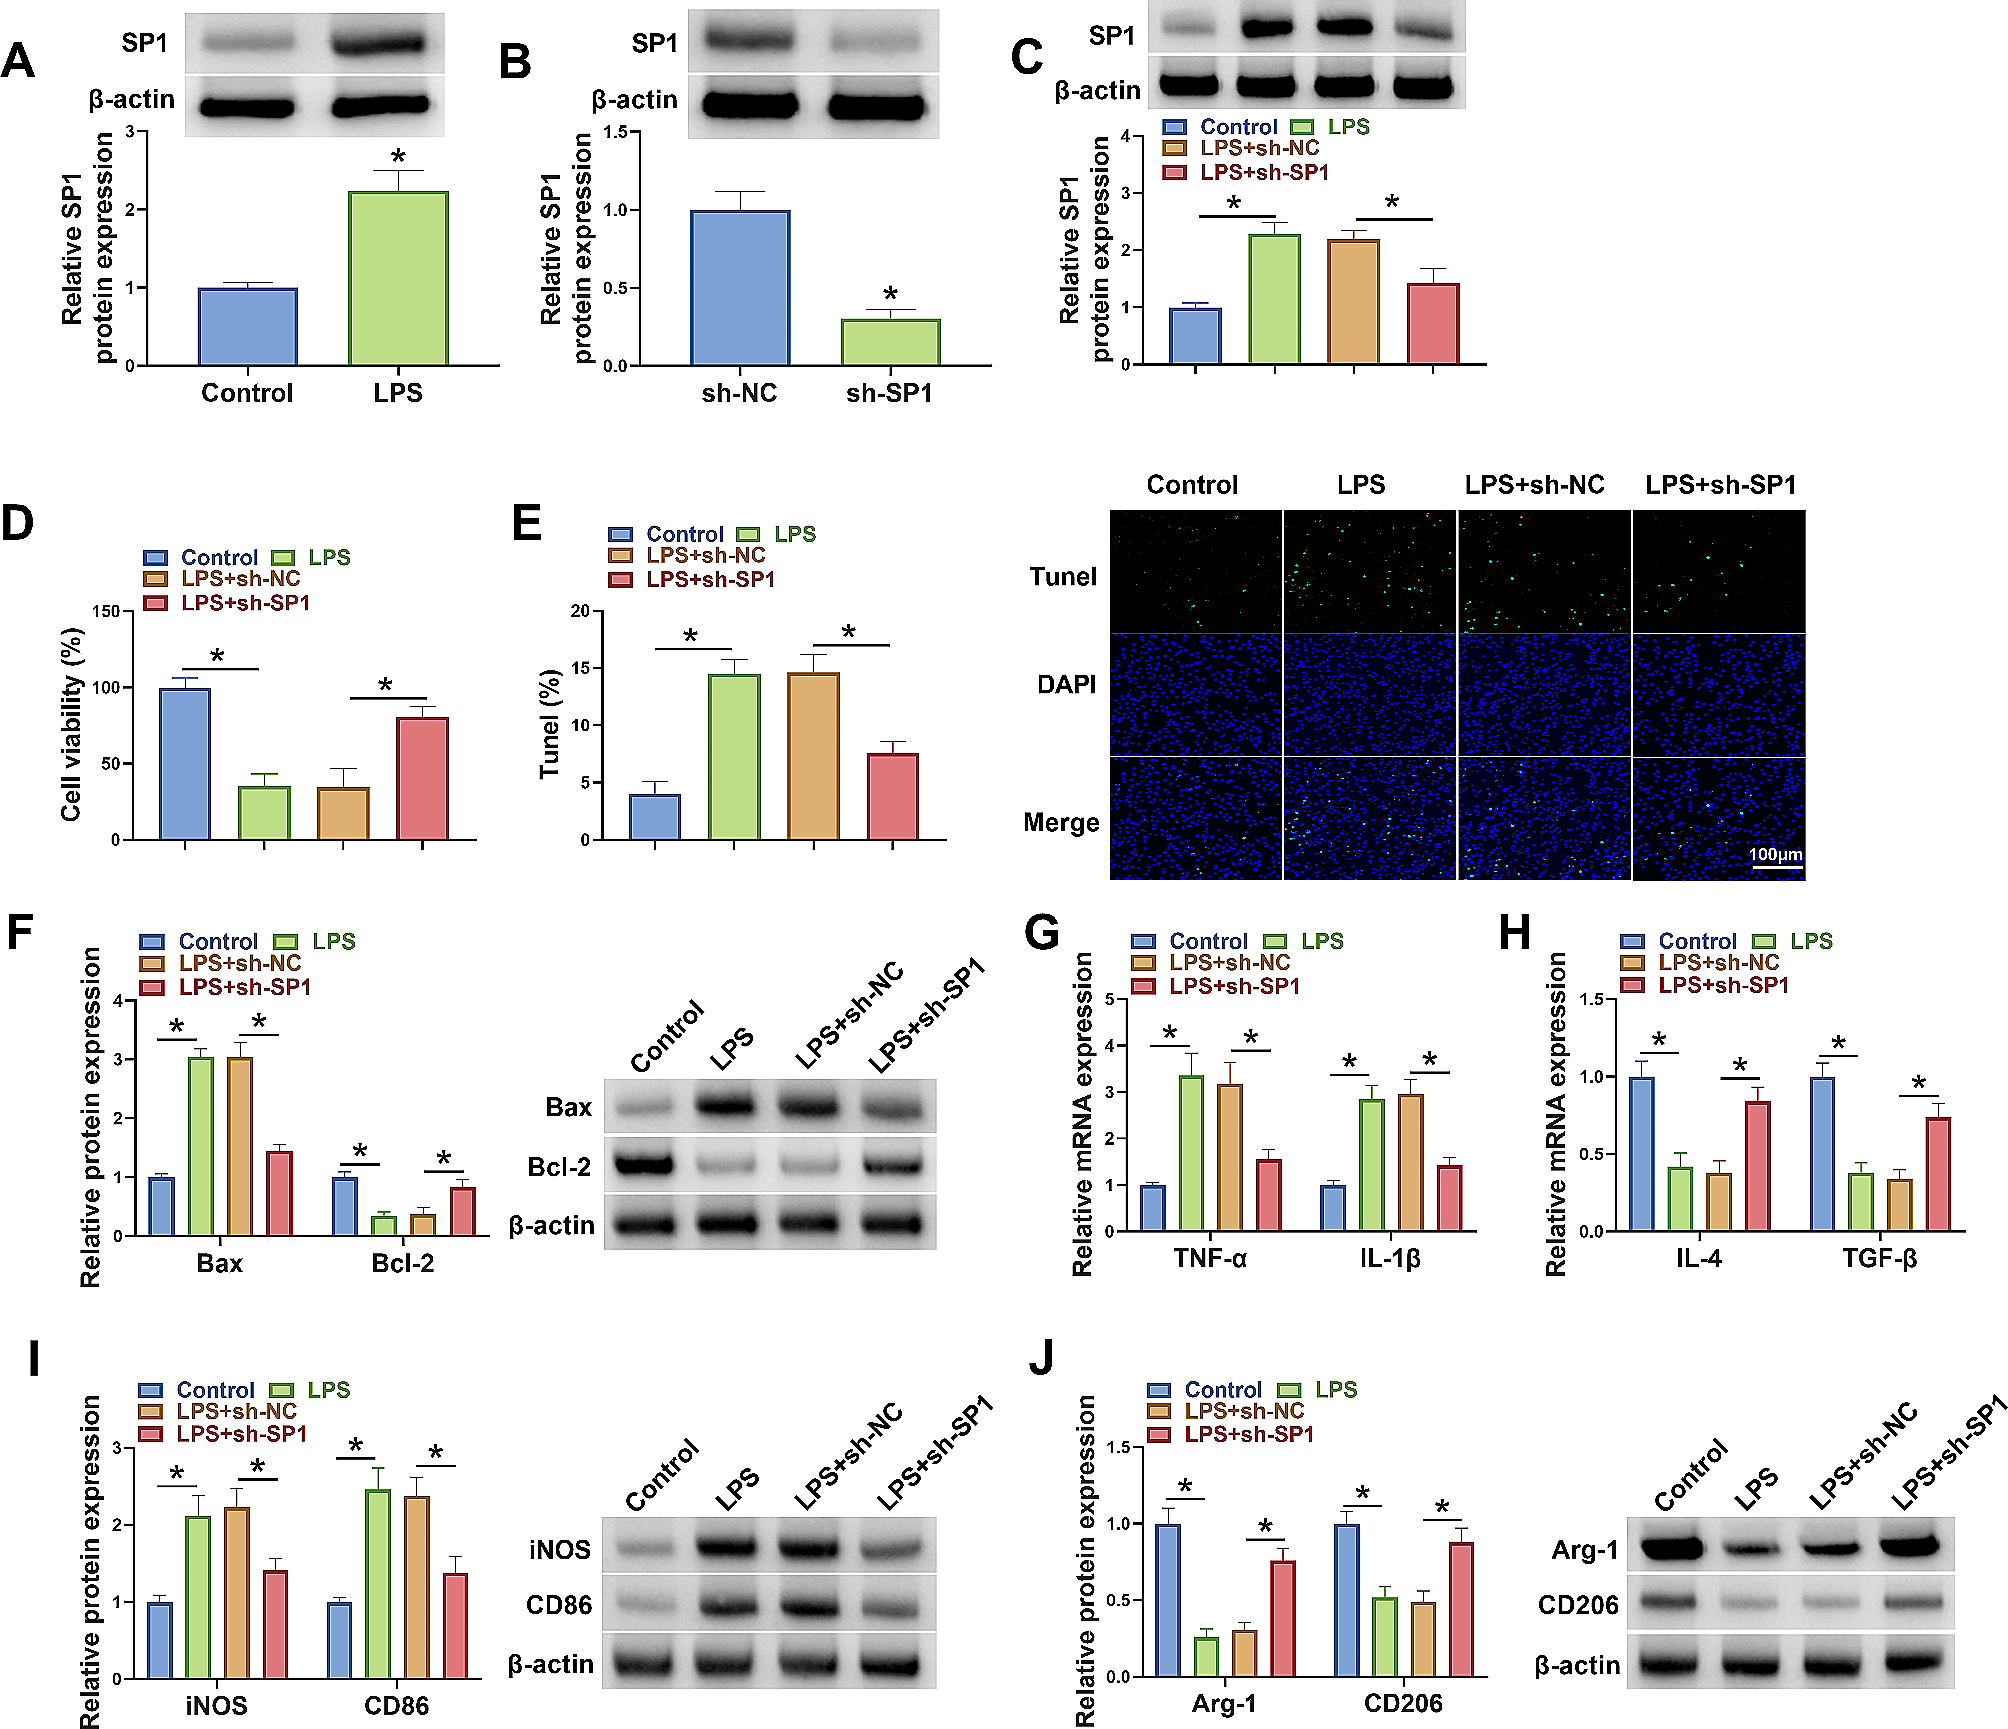 SP1 transcriptionally activates HTR2B to aggravate traumatic spinal cord injury by shifting microglial M1/M2 polarization